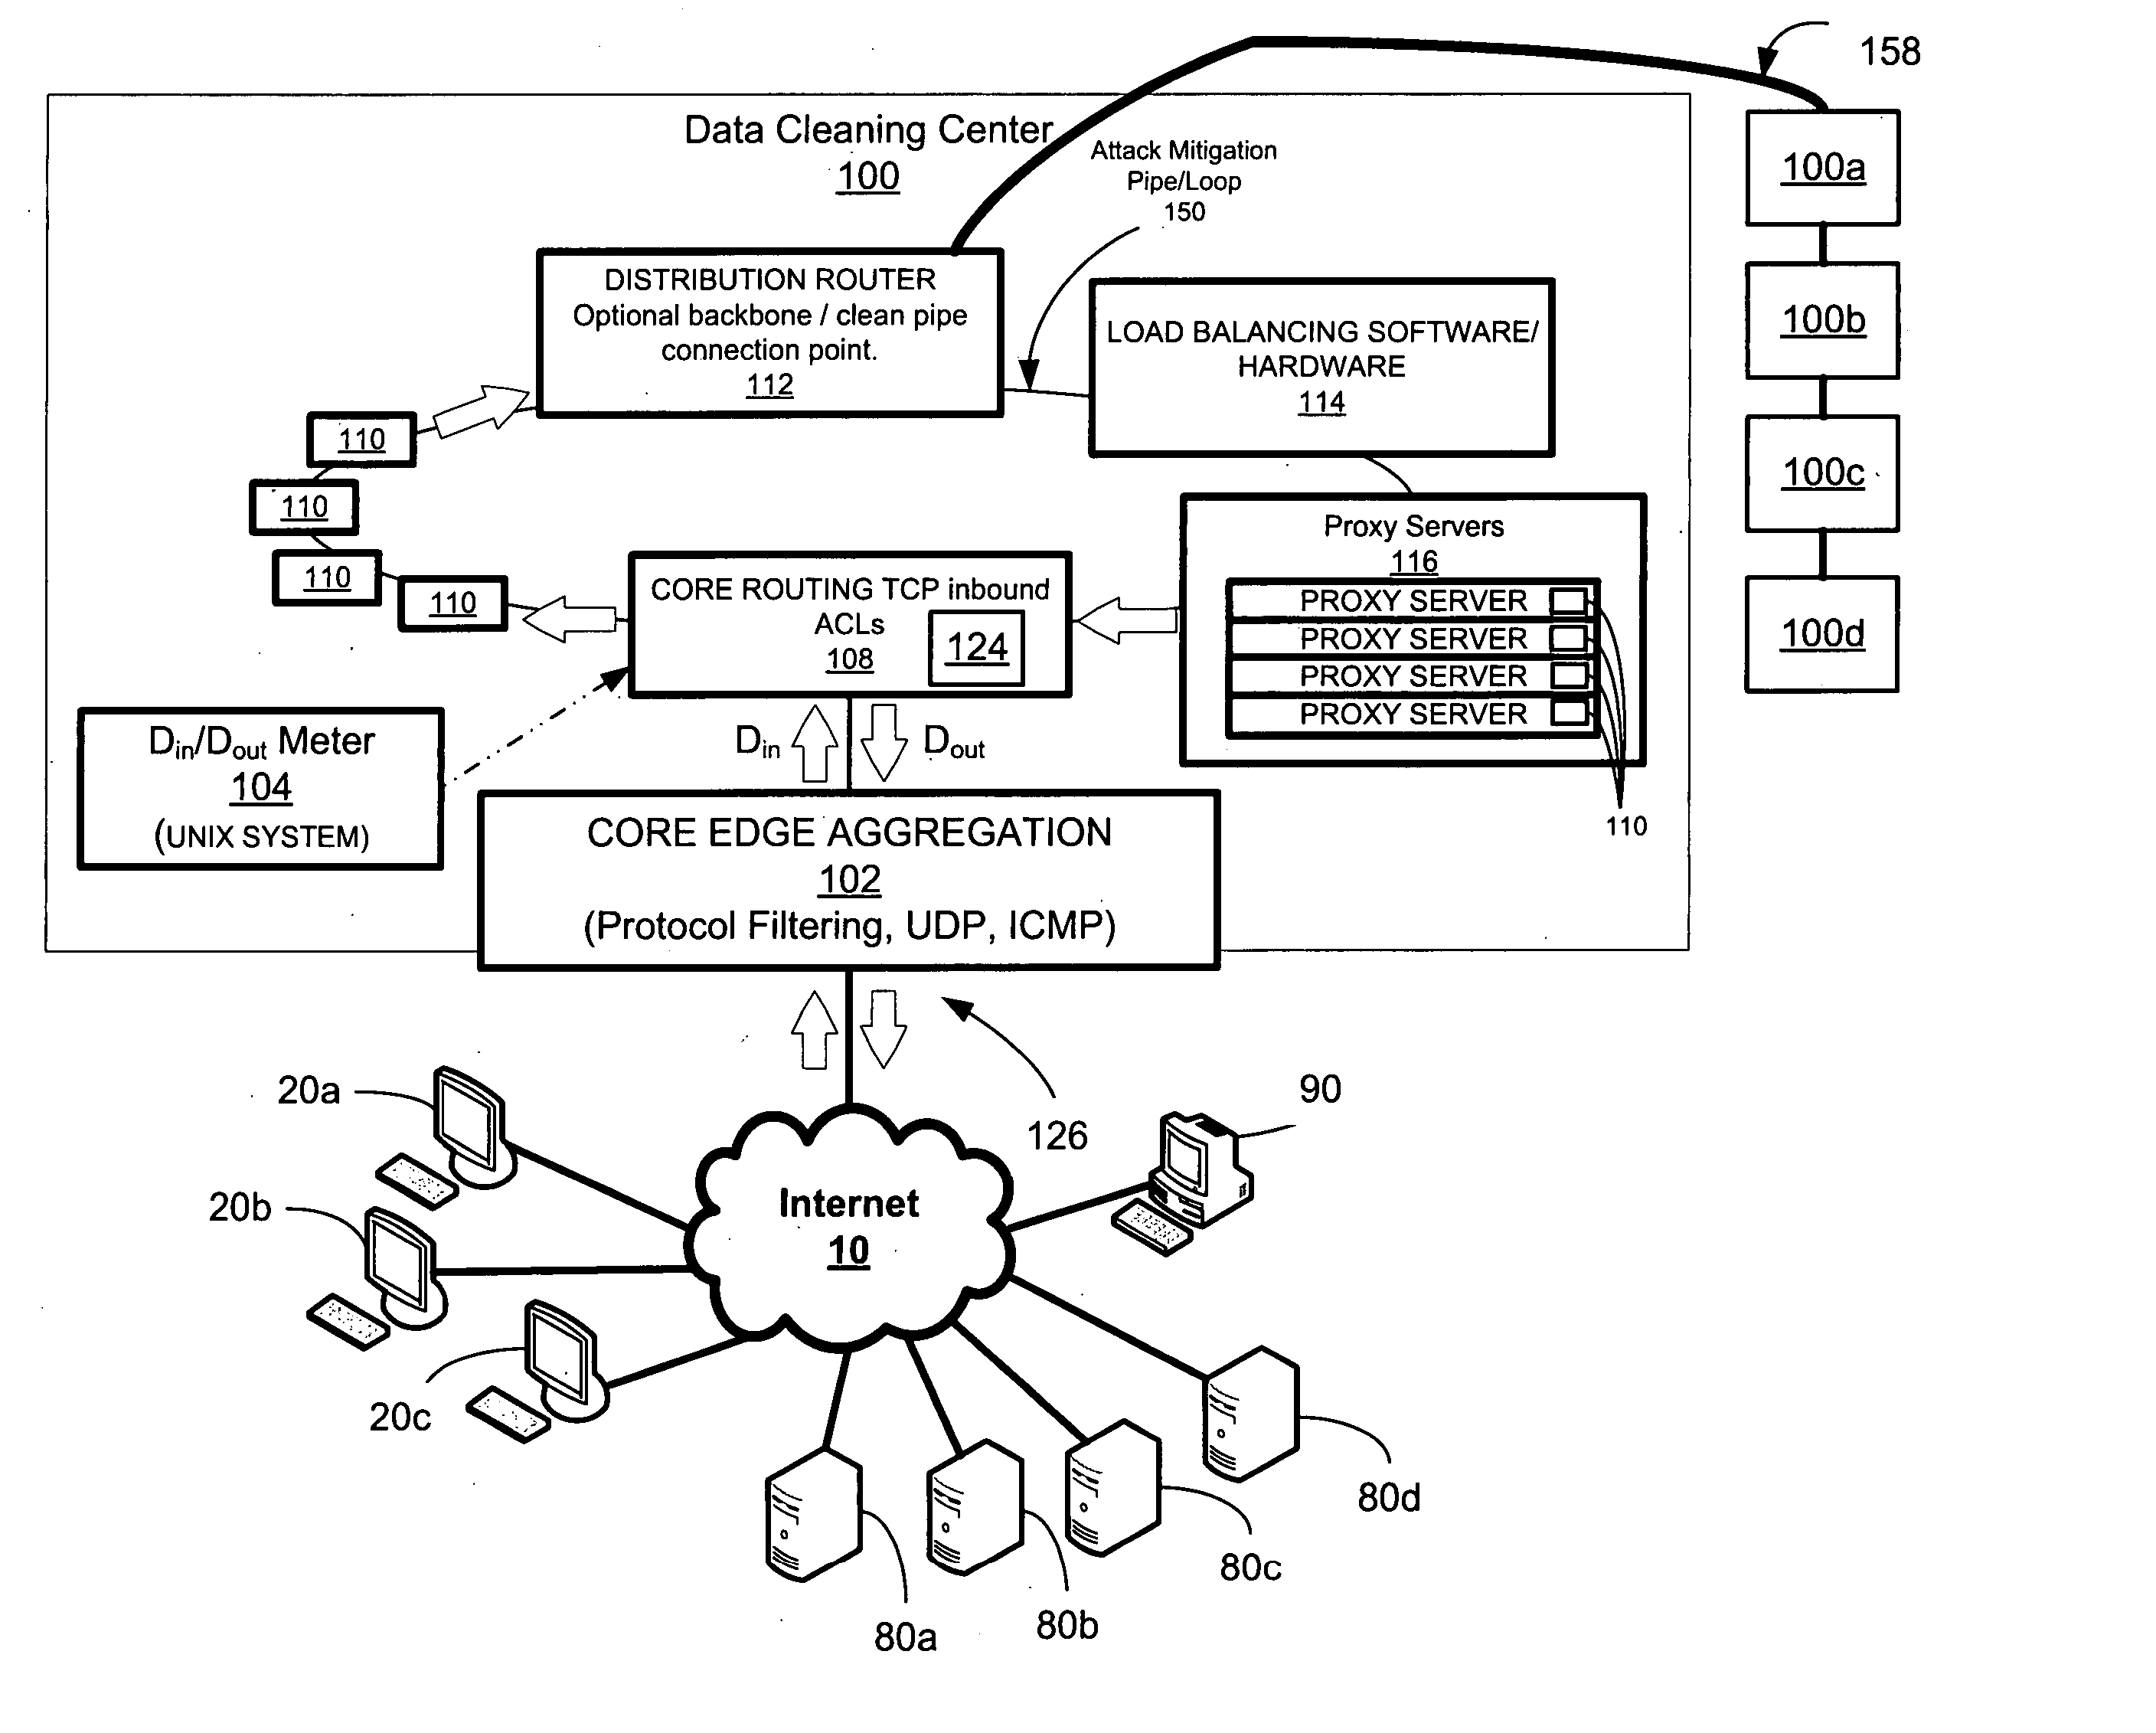 Network overload detection and mitigation system and method